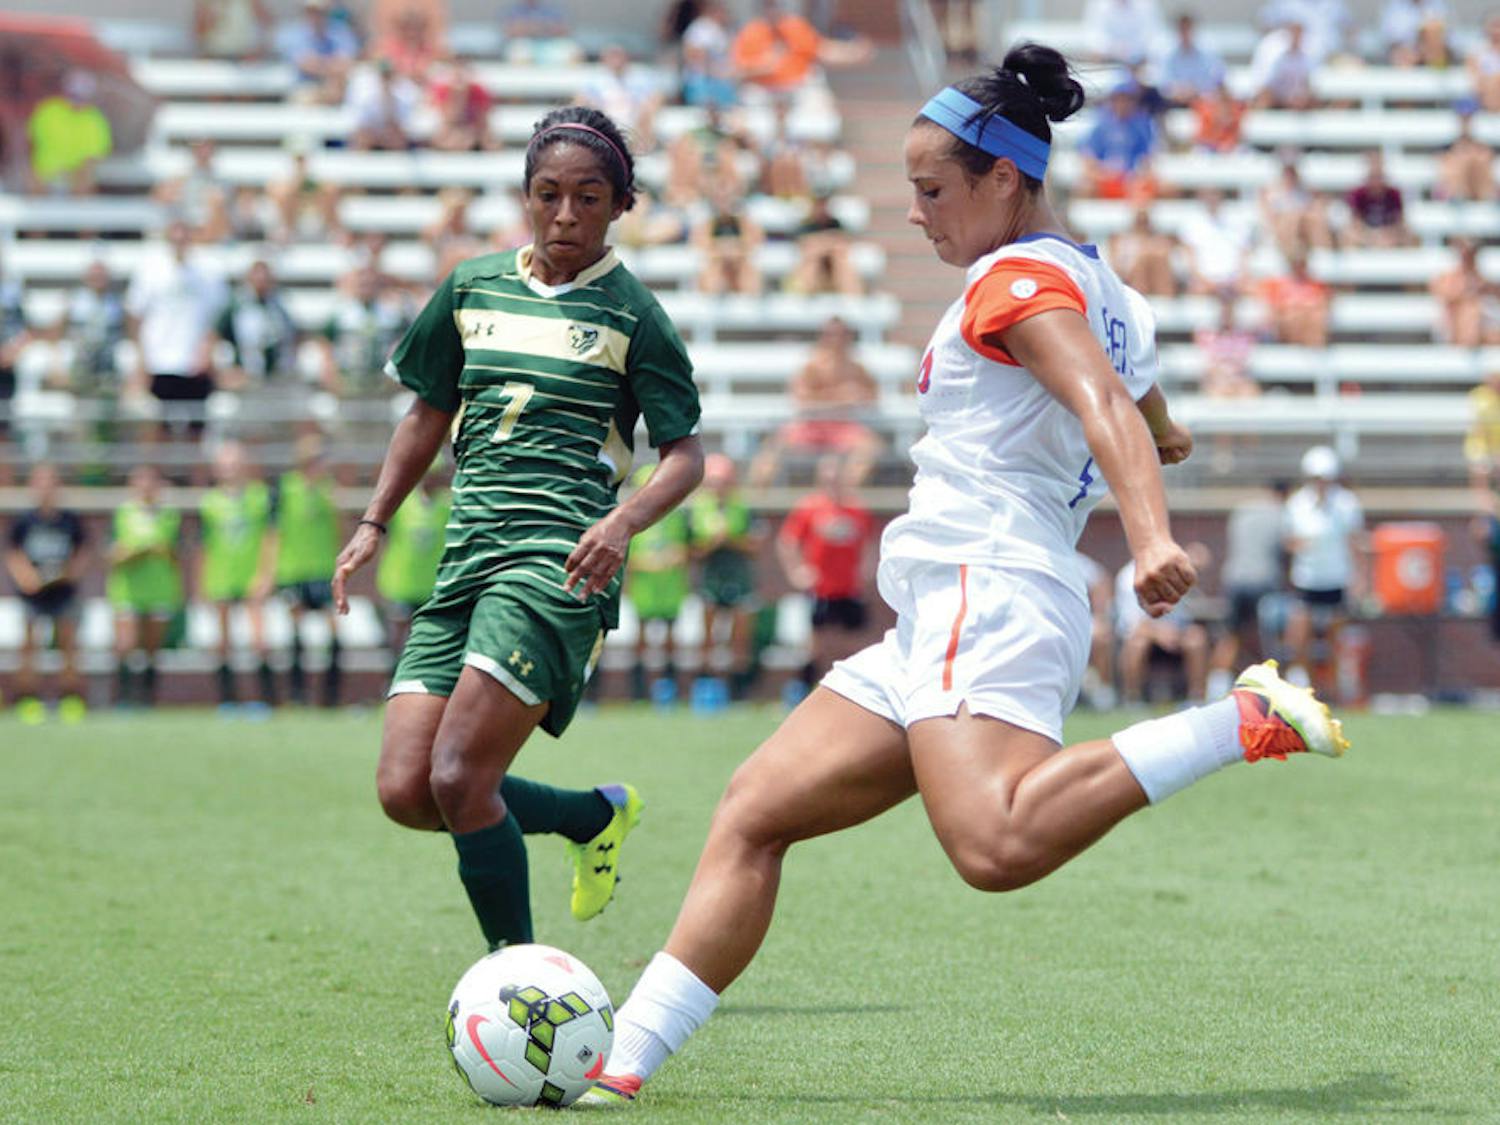 Lauren Silver kicks the ball during Florida's 2-0 win against South Florida.